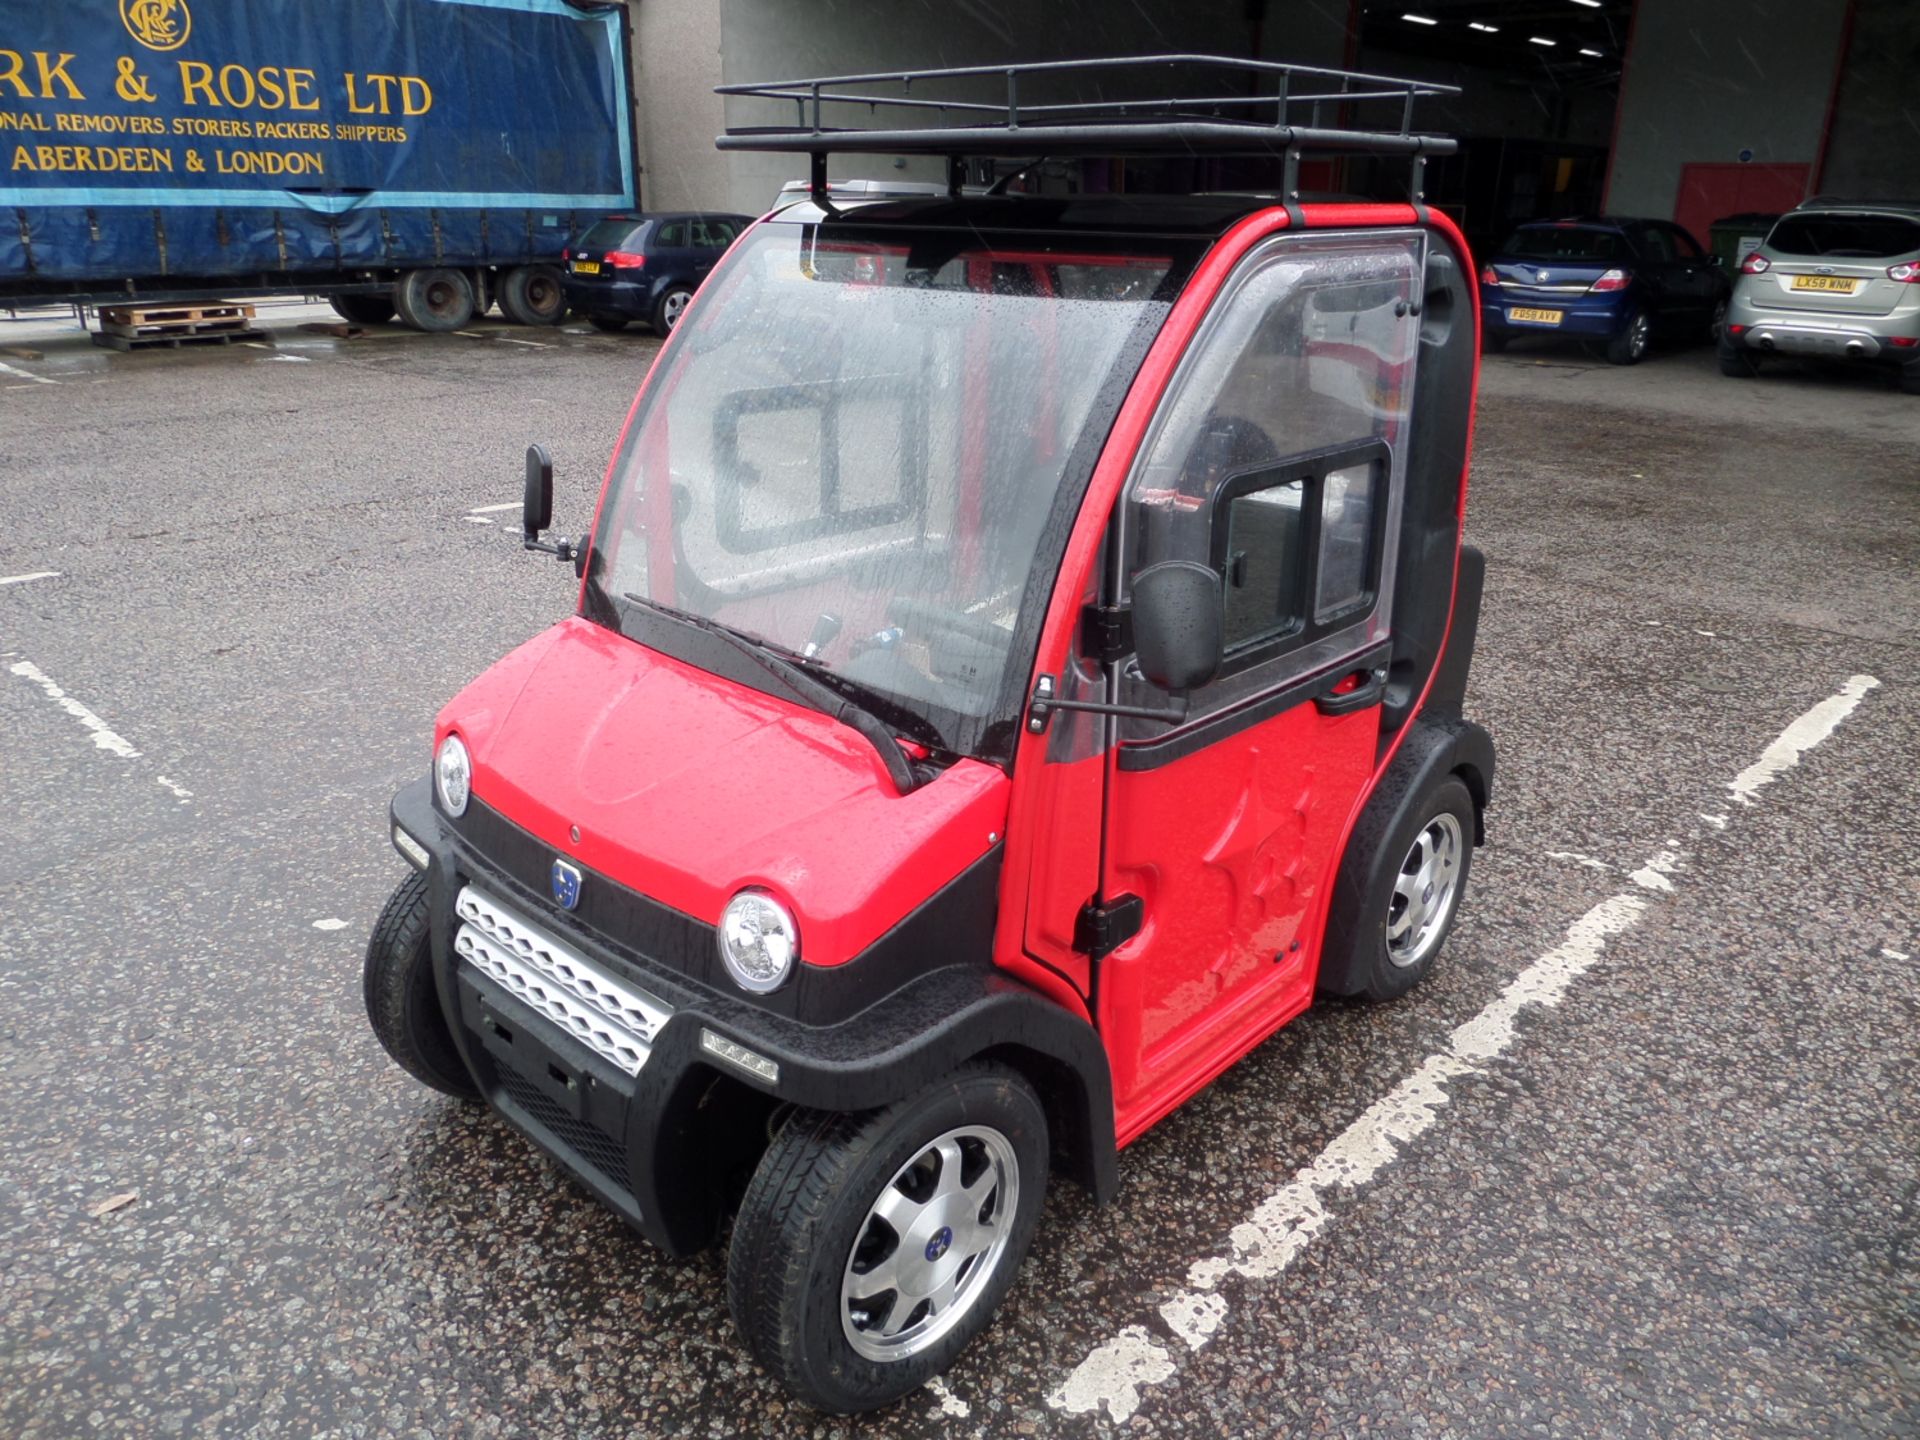 Jonway Urbee Electric Car, Brand new & unused. Type Approved August 2014 - Image 2 of 6